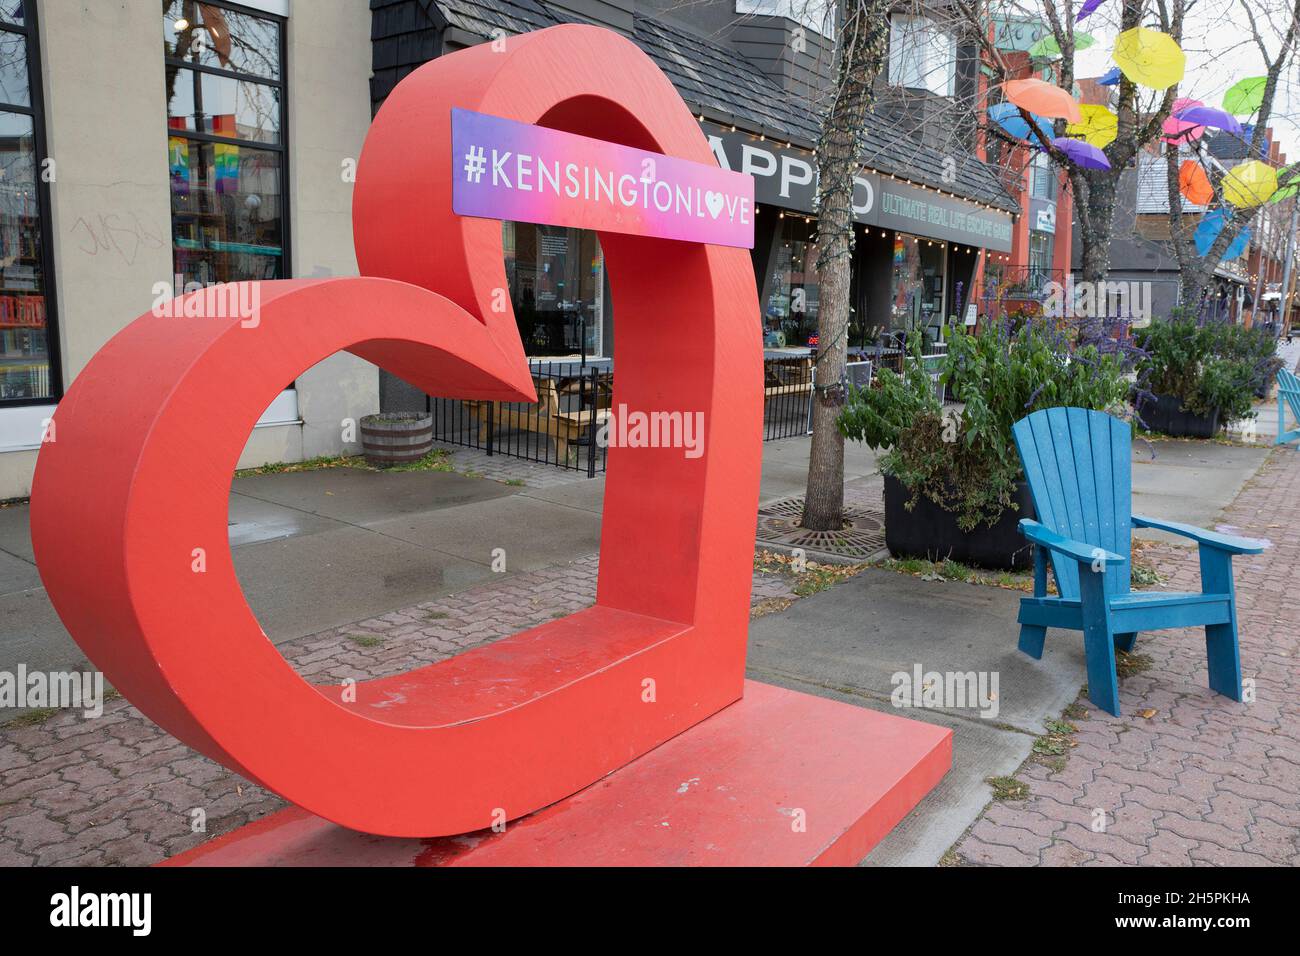 Red heart with #kensingtonlove, an art installation for a celebration of love, inclusivity and community in Kensington Village, Calgary, Alberta Stock Photo